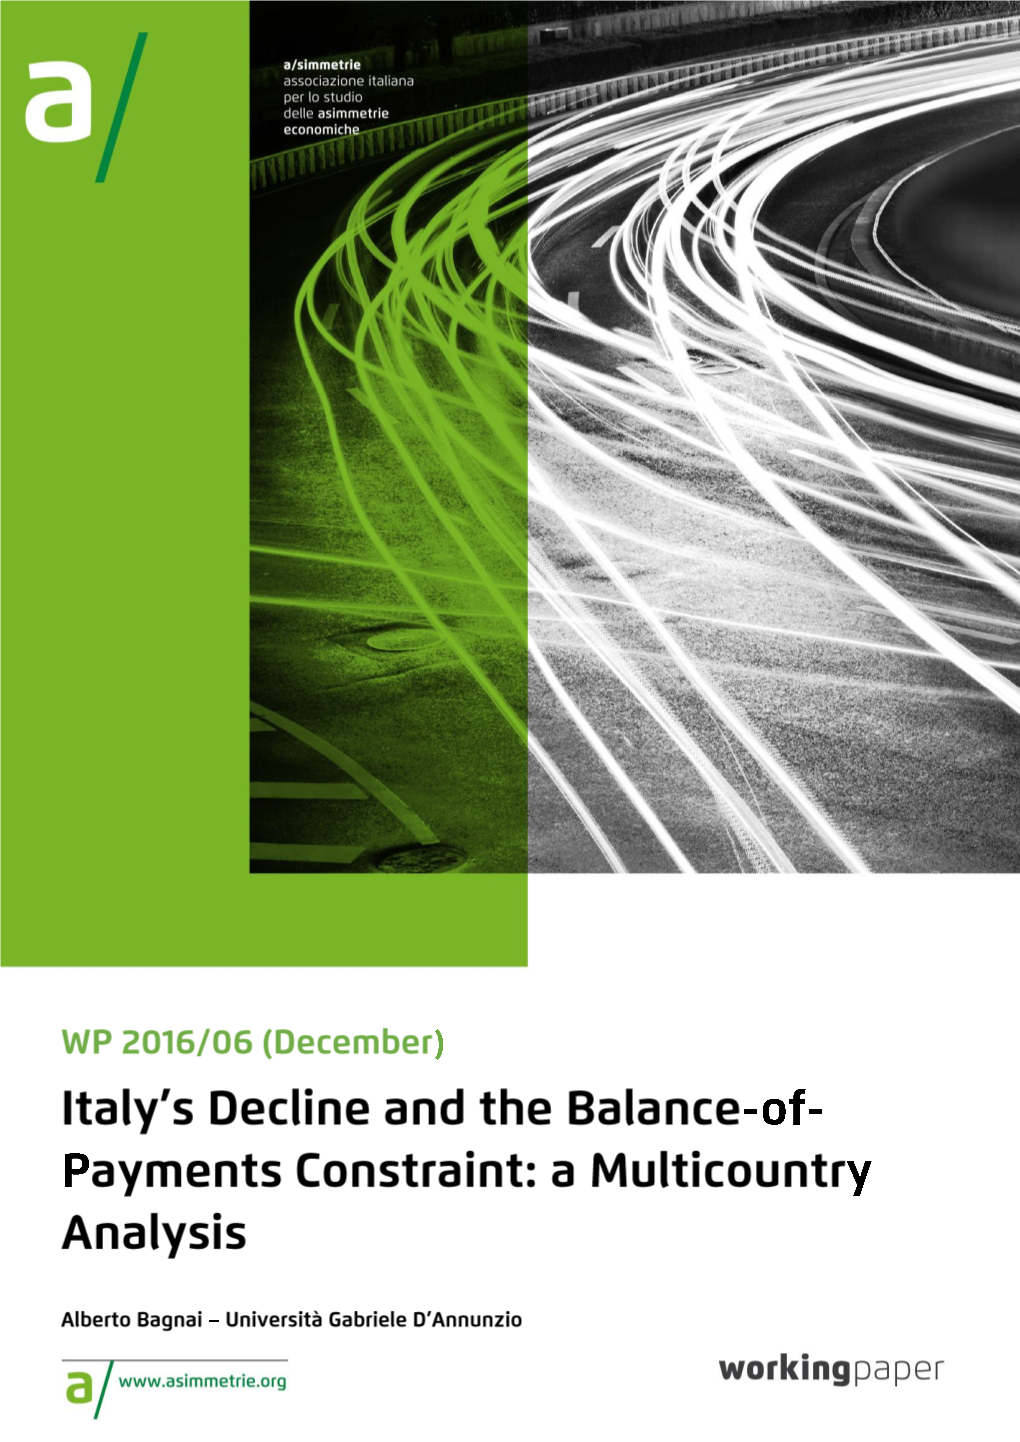 Italy's Decline and the Balance-Of-Payments